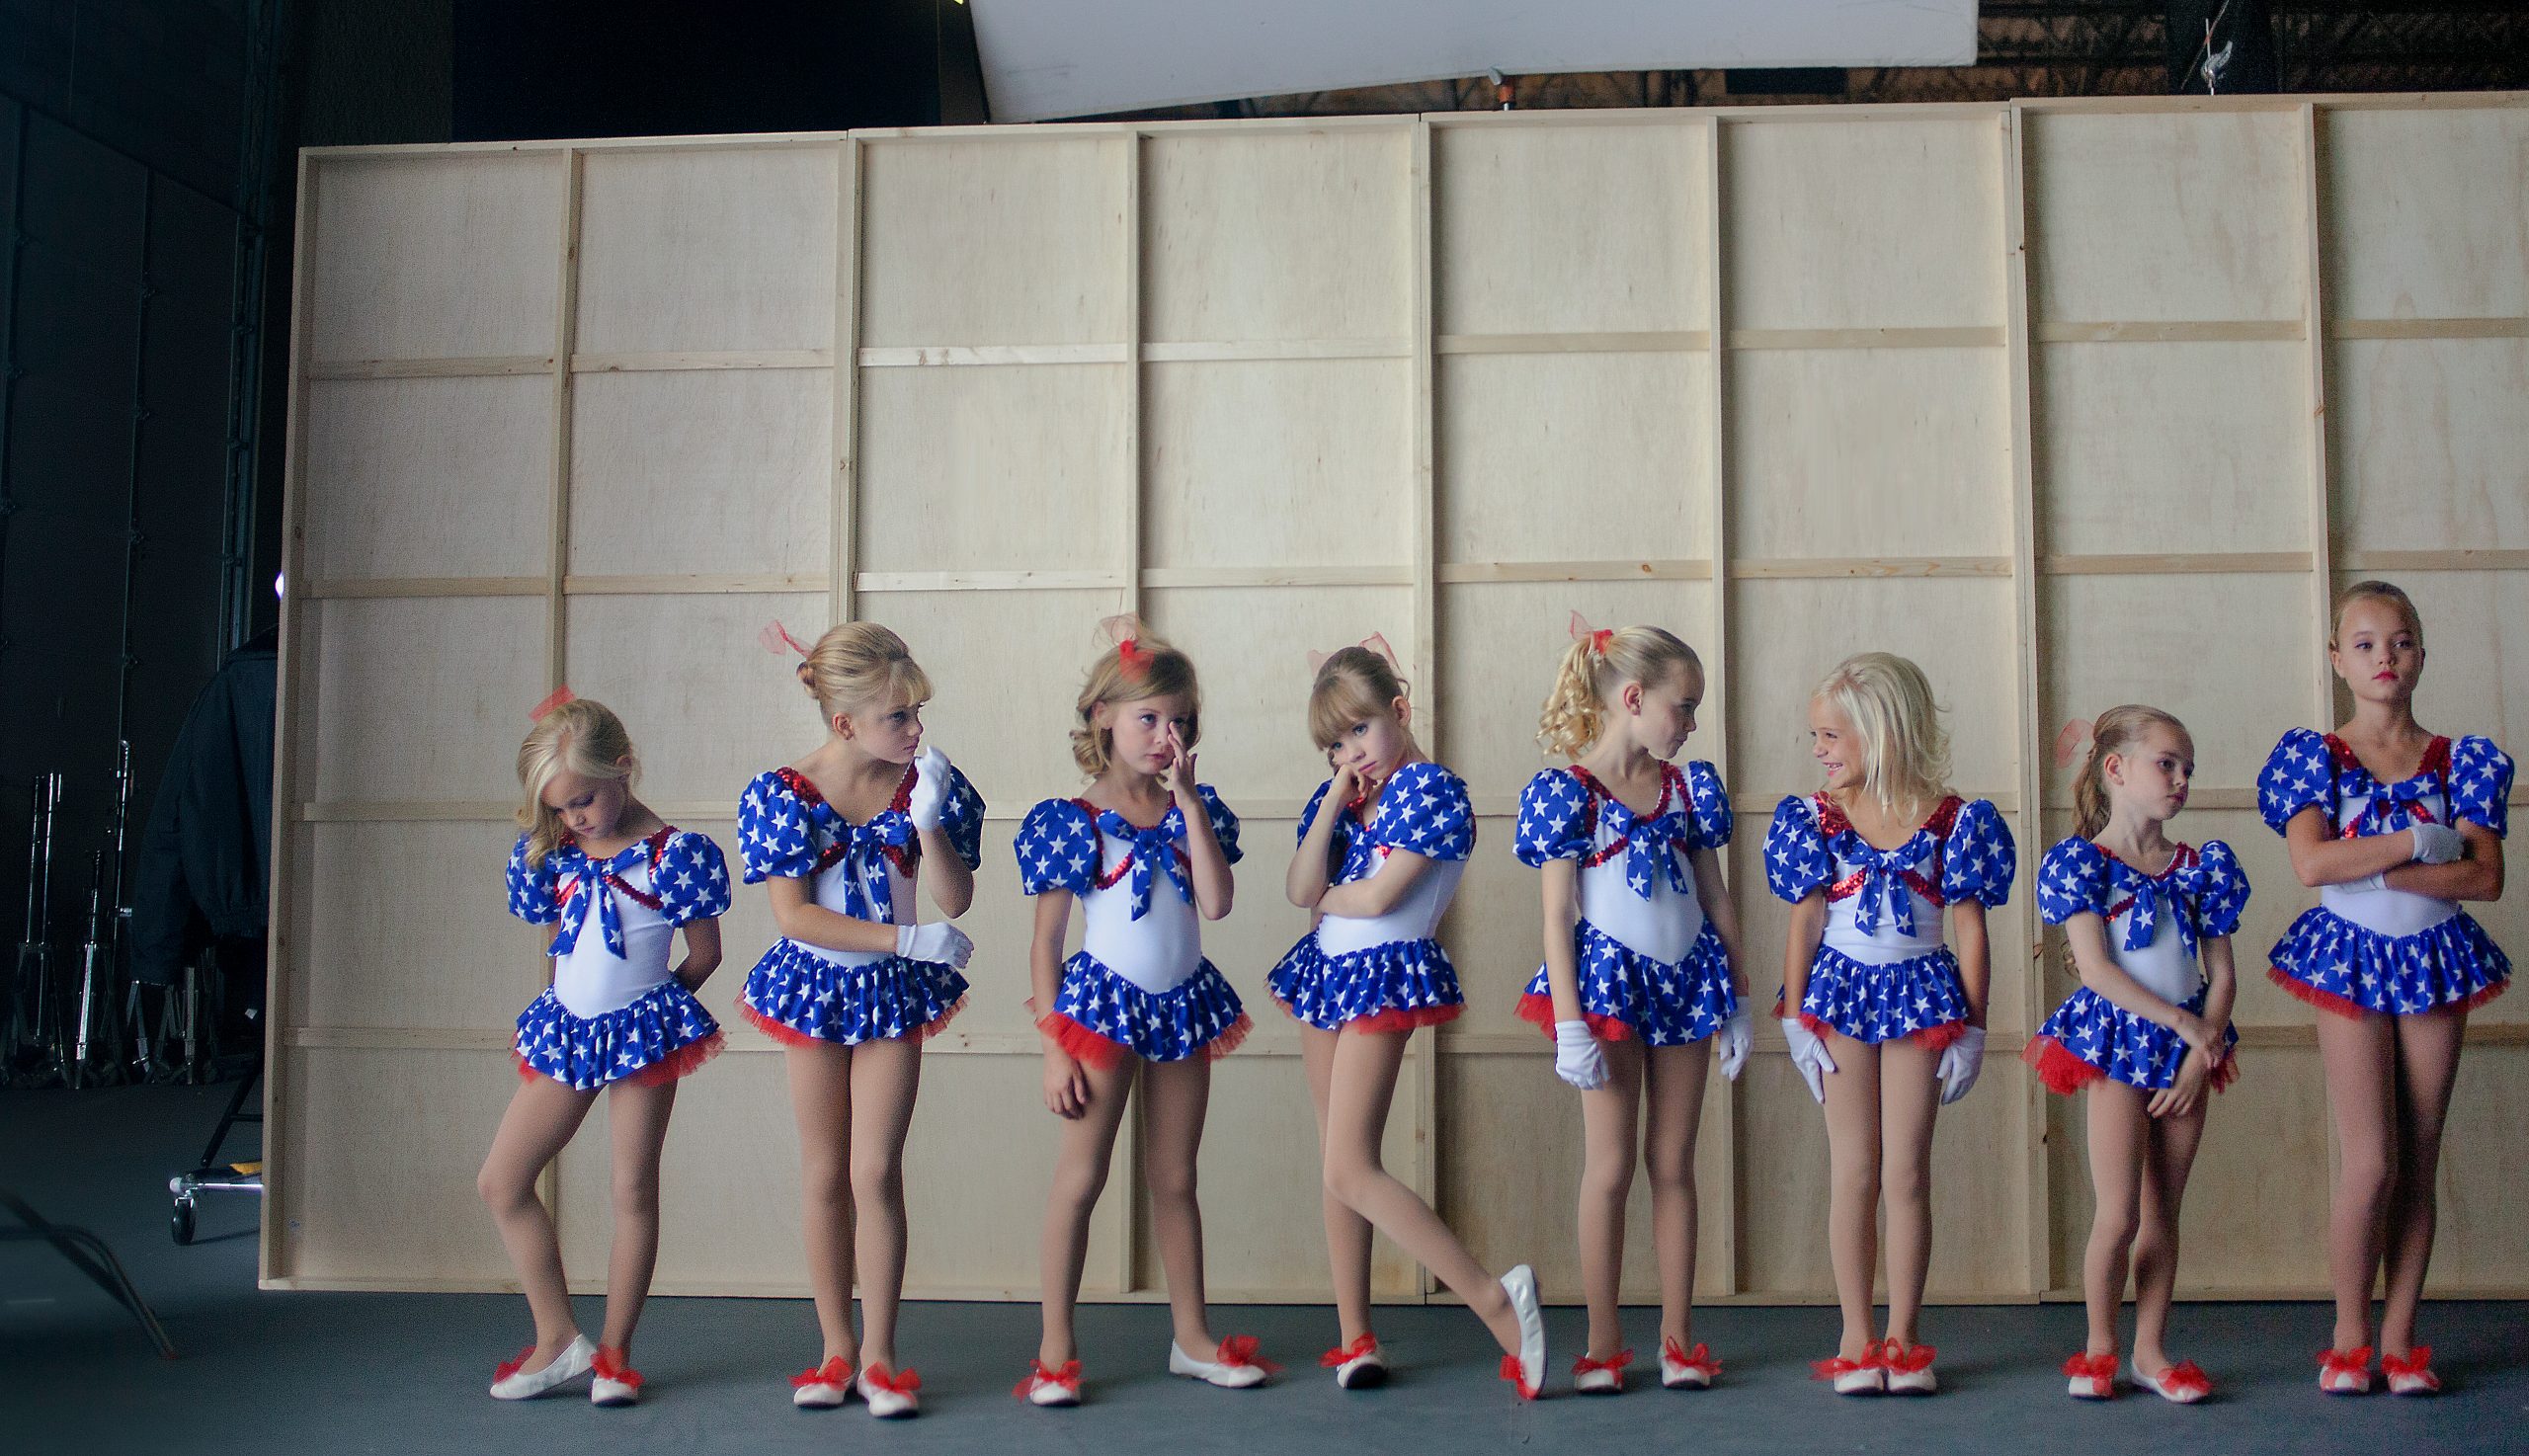 Girls line up to audition in Kitty Green's documentary Casting JonBenet.